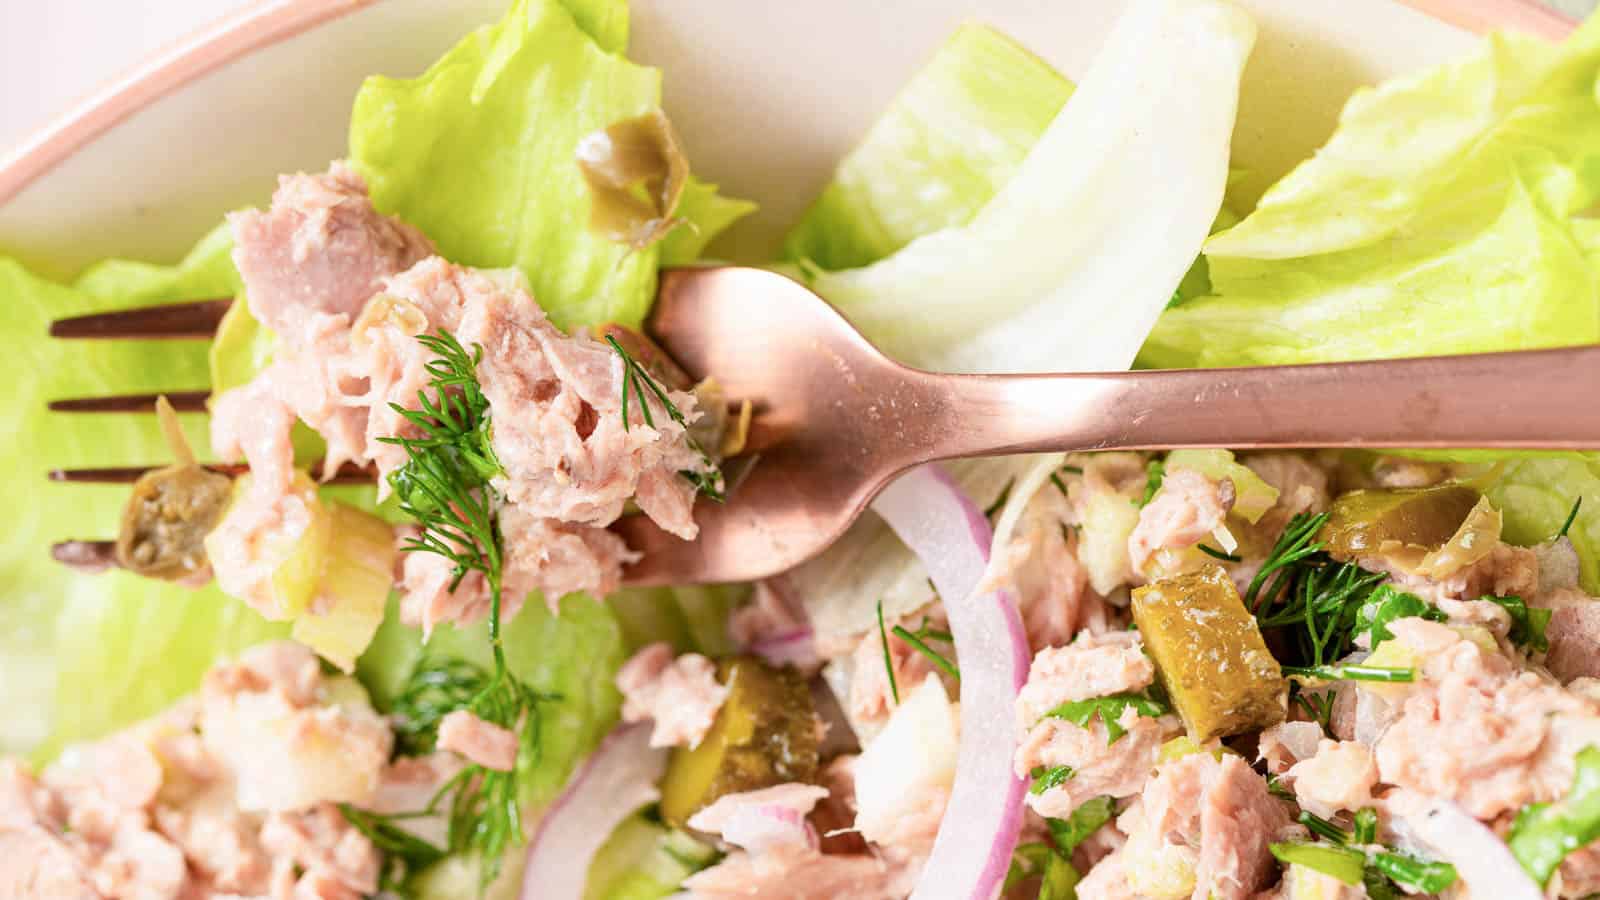 Healthy Tuna salad without mayo sits on a bed of iceberg lettuce surrounded by two forks, dill, and a green linen.